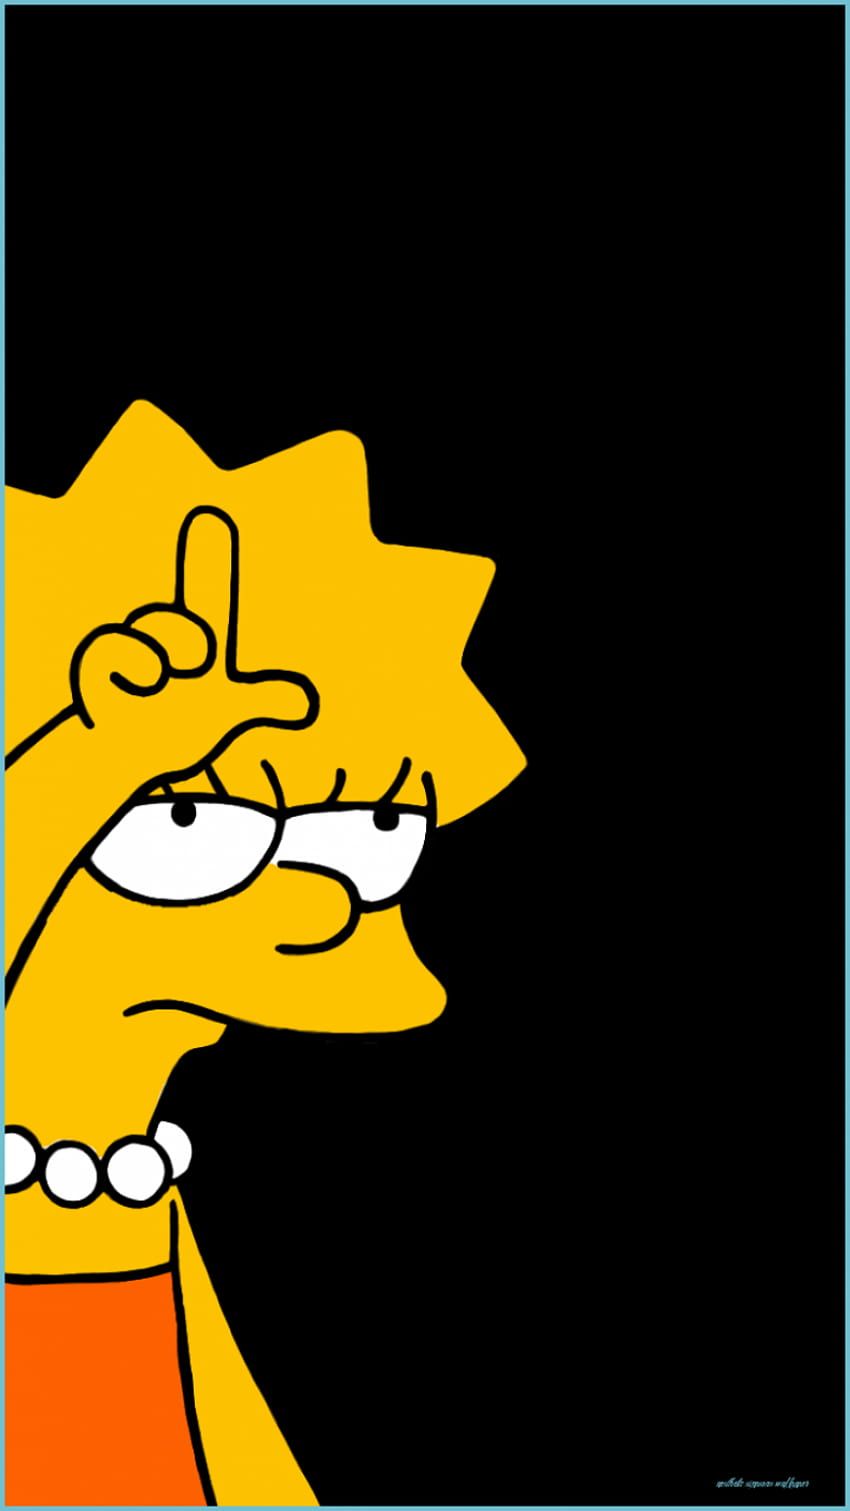 Lisa Simpson wallpaper for iPhone and Android phone. - Lisa Simpson, The Simpsons, Homer Simpson